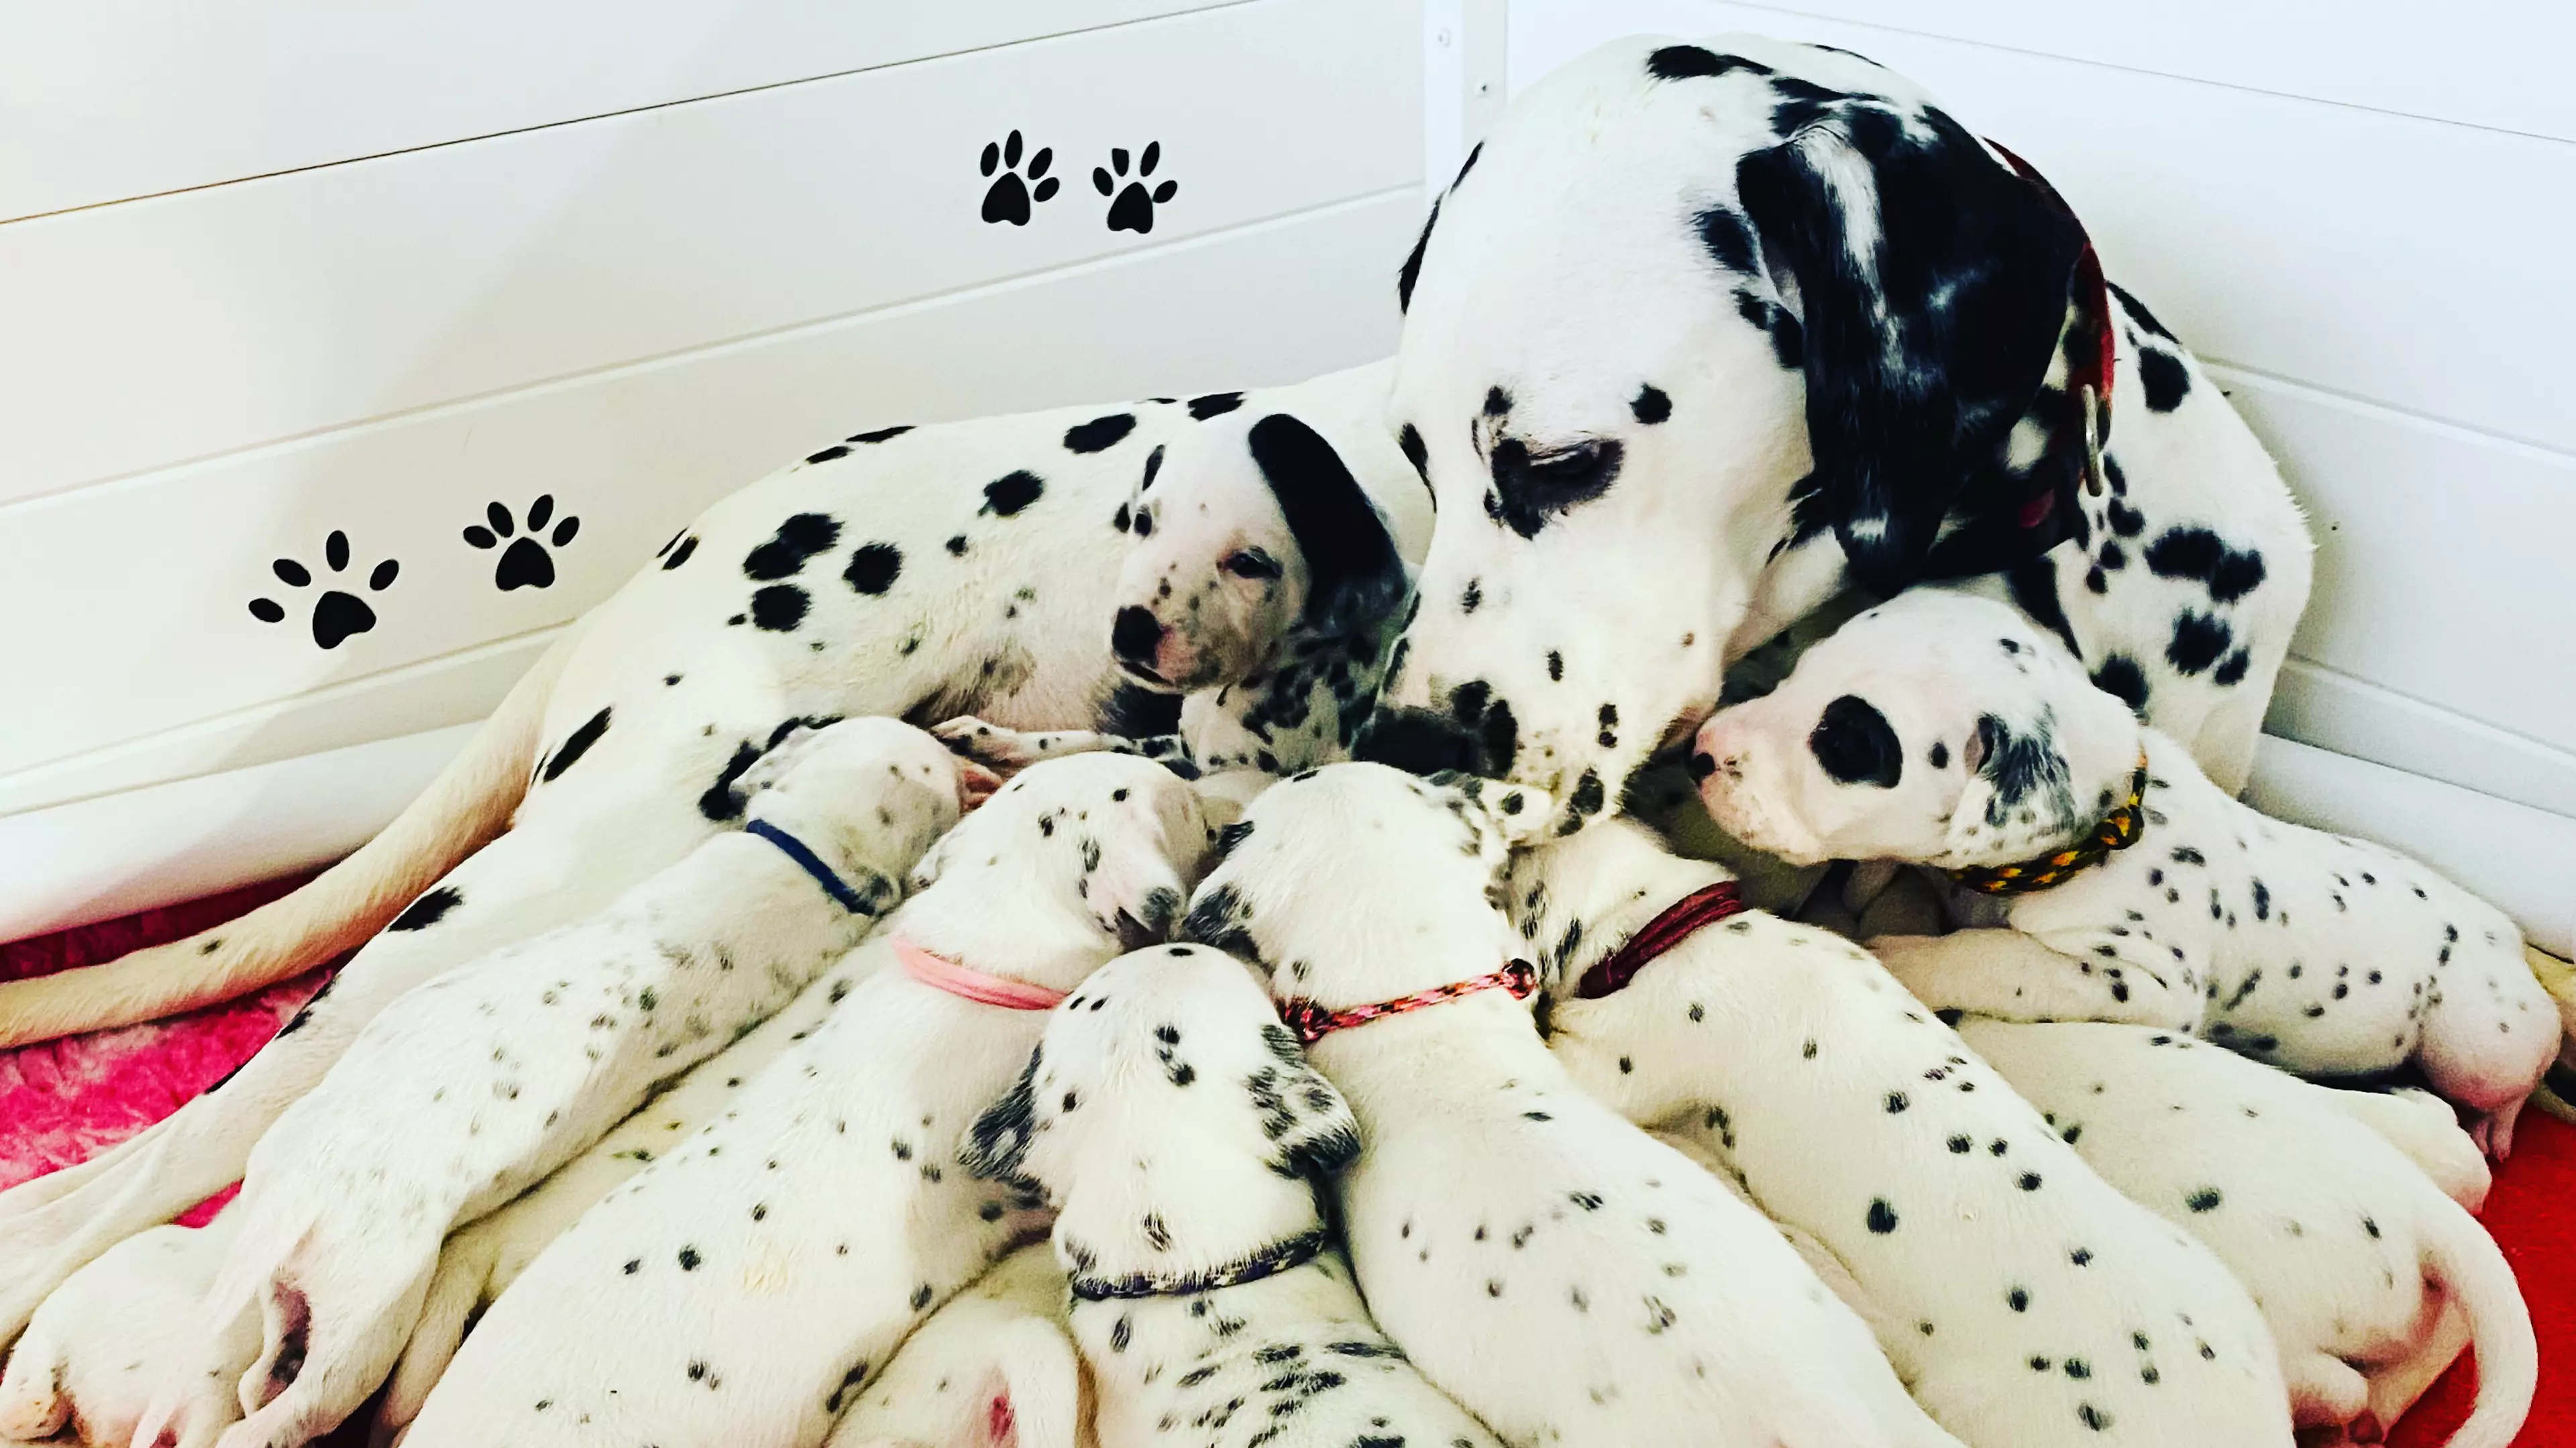 A Dalmatian Gave Birth To Huge Litter And The Story Is Like A Disney Movie  